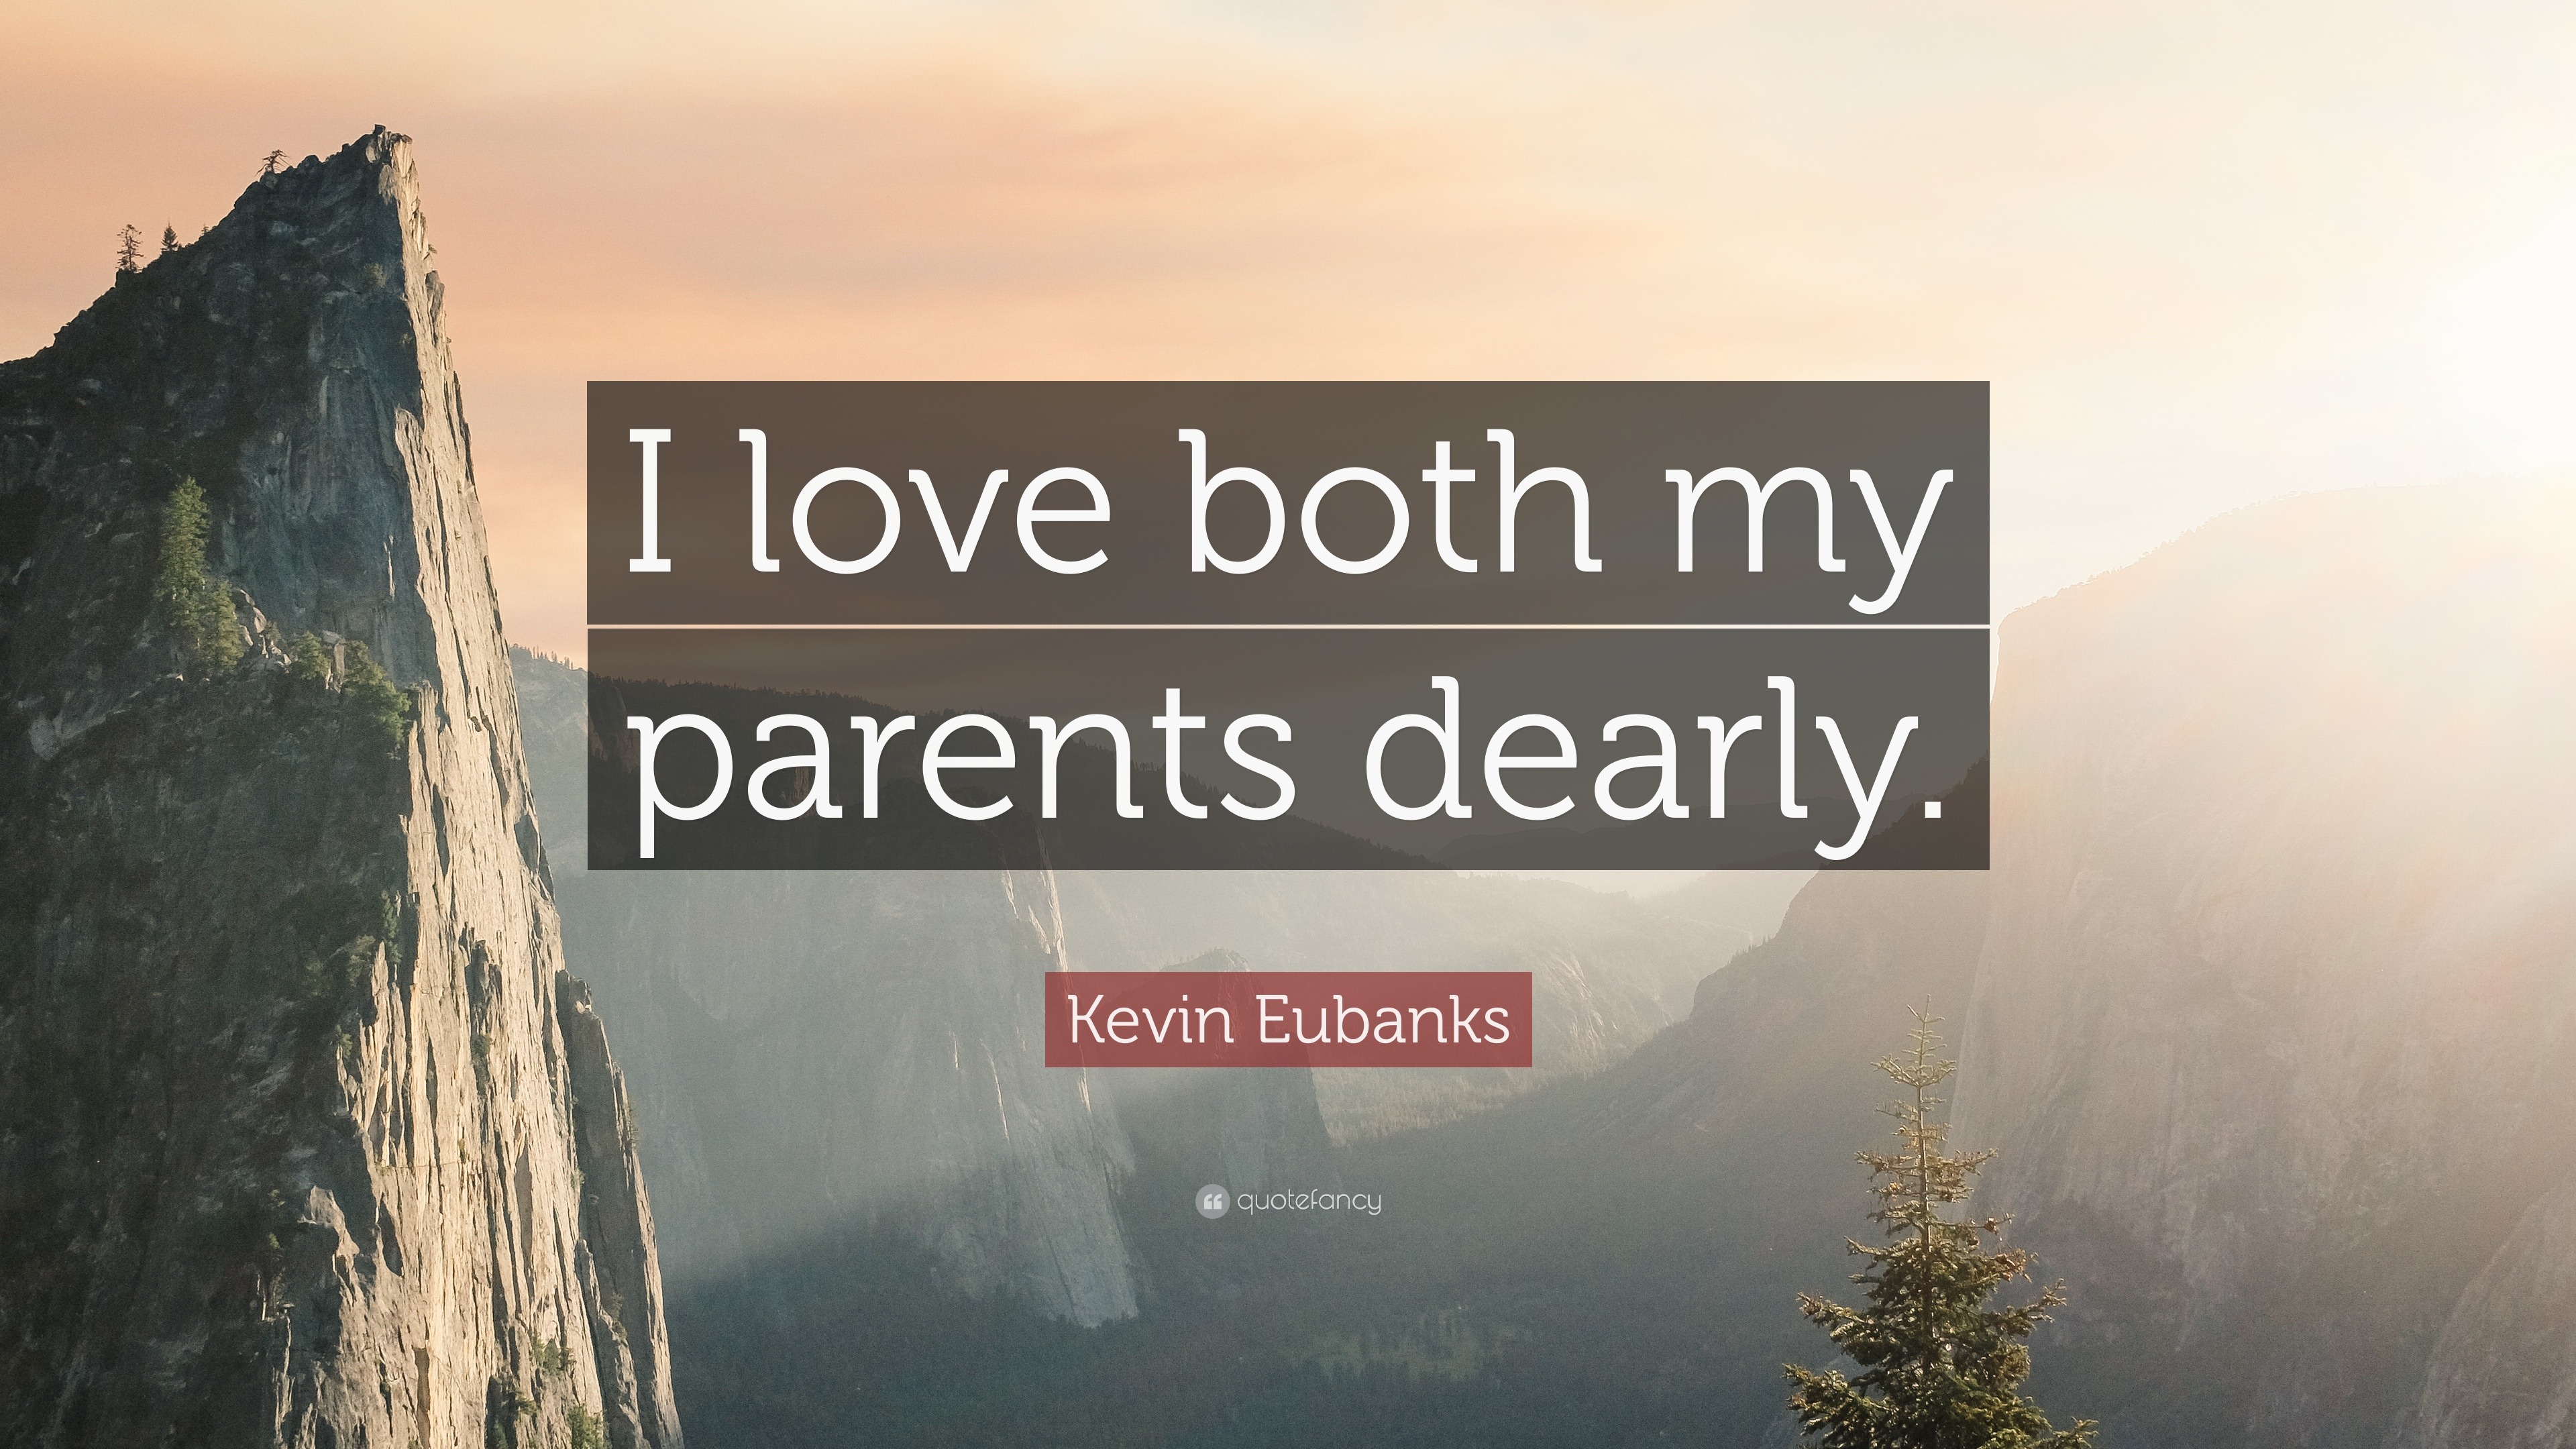 Kevin Eubanks Quote: “I love both my parents dearly.”